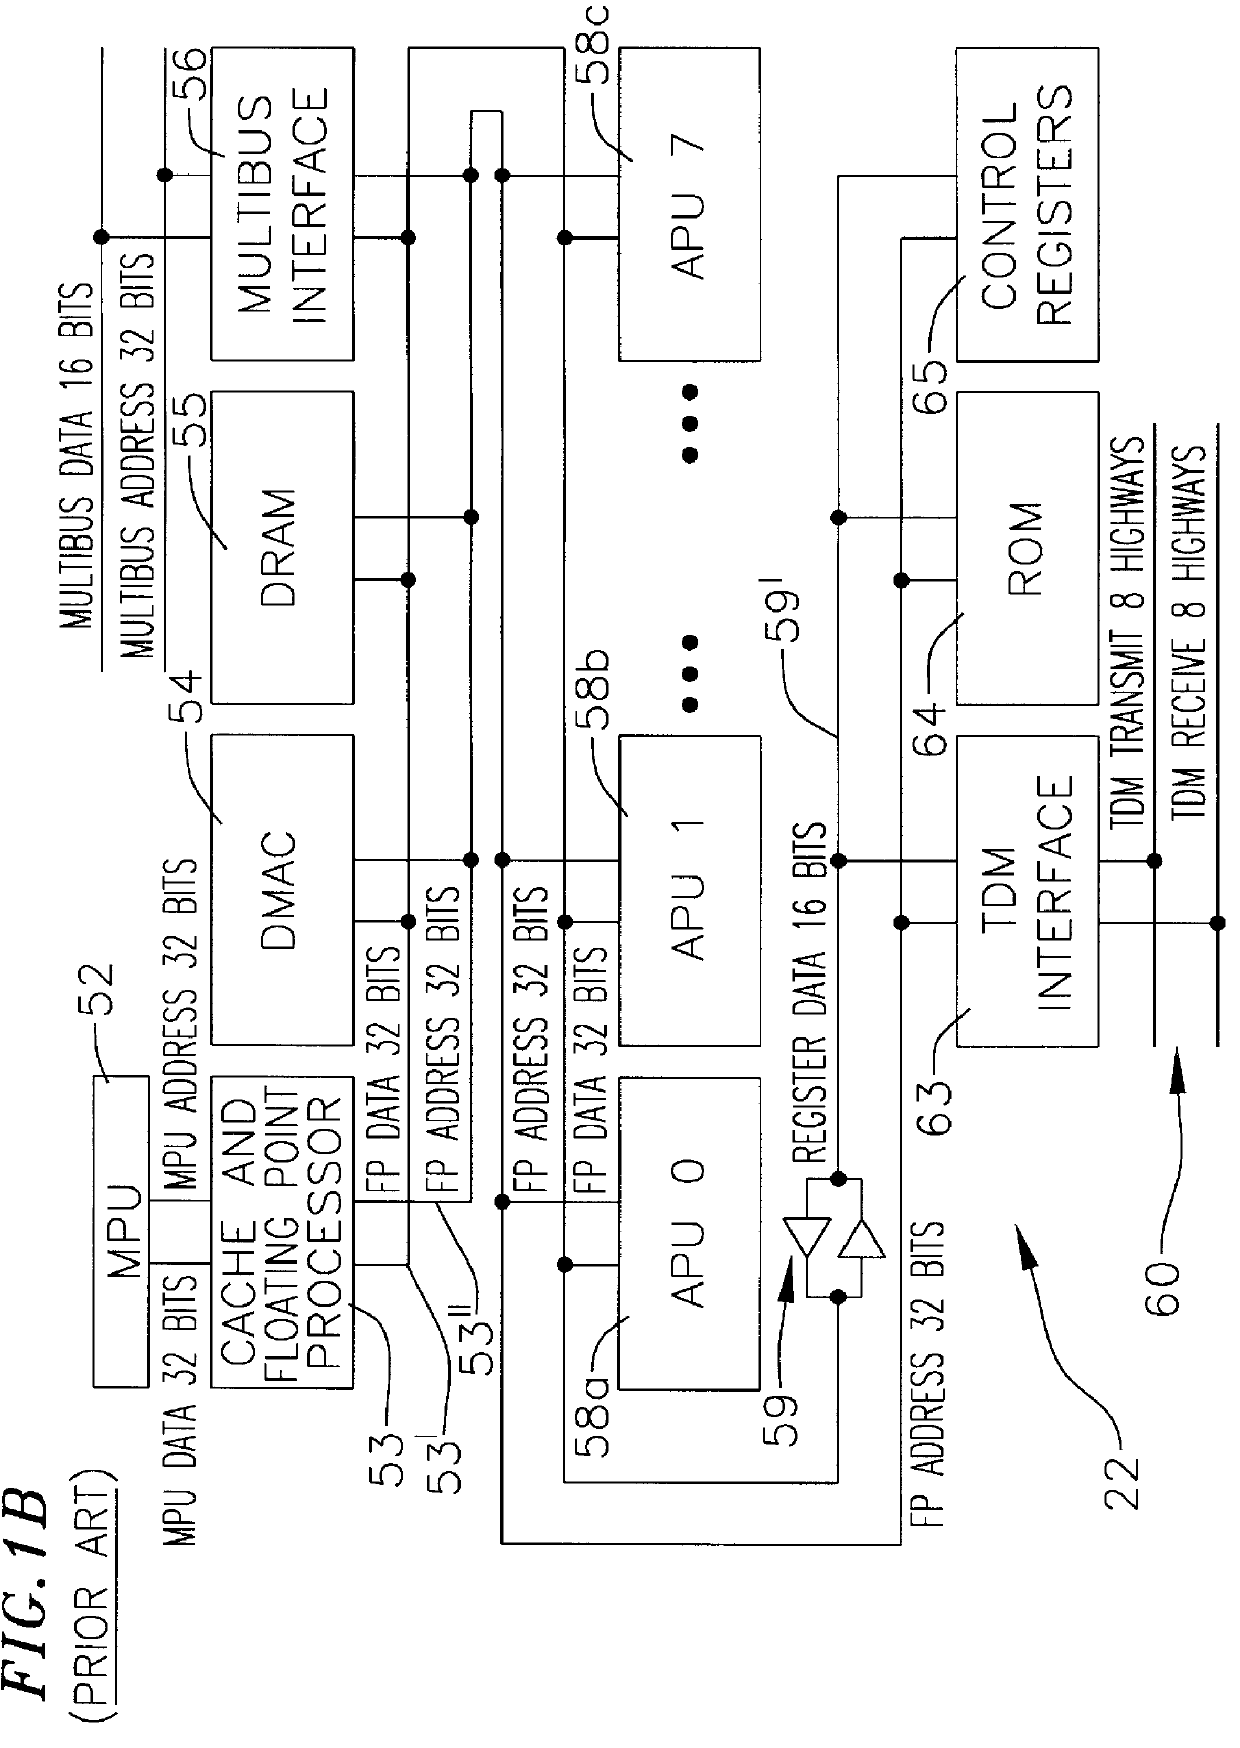 Voice controlled messaging system and processing method